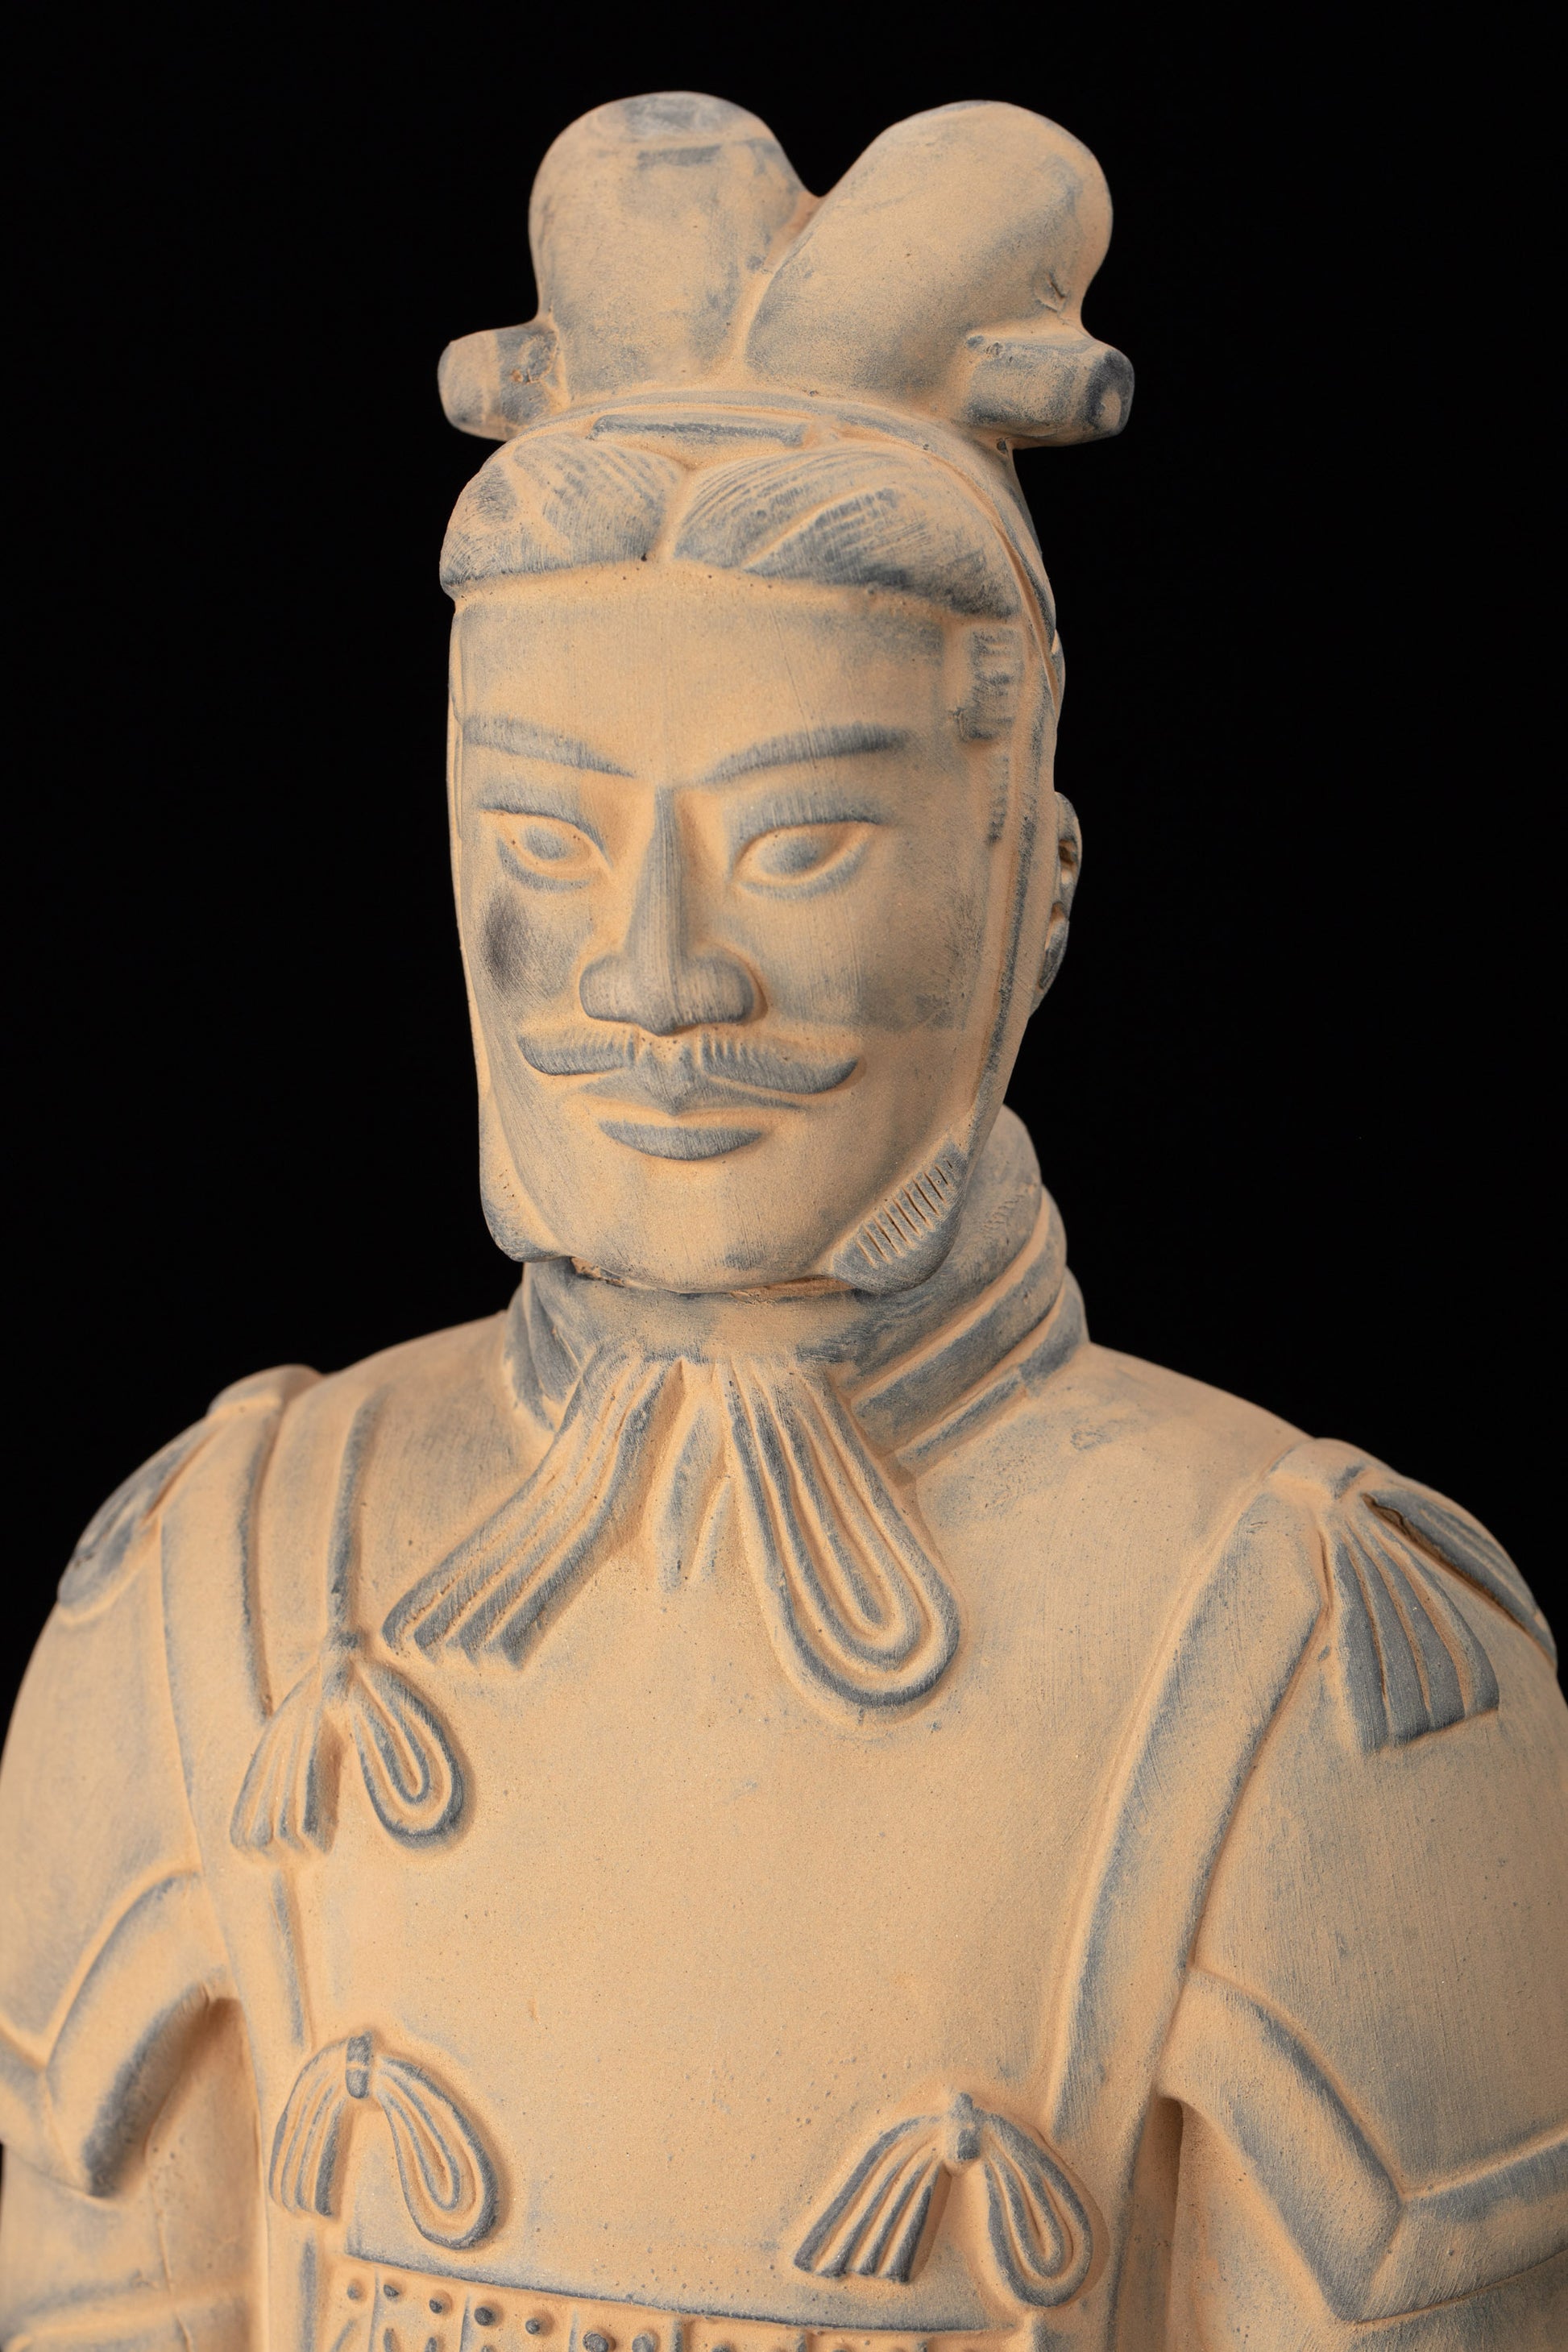 55CM General - CLAYARMY-Meticulous Facial Sculpting: Frontal perspective of the 55CM Terracotta Army General, highlighting meticulous detailing in the sculpting of facial features and armor.